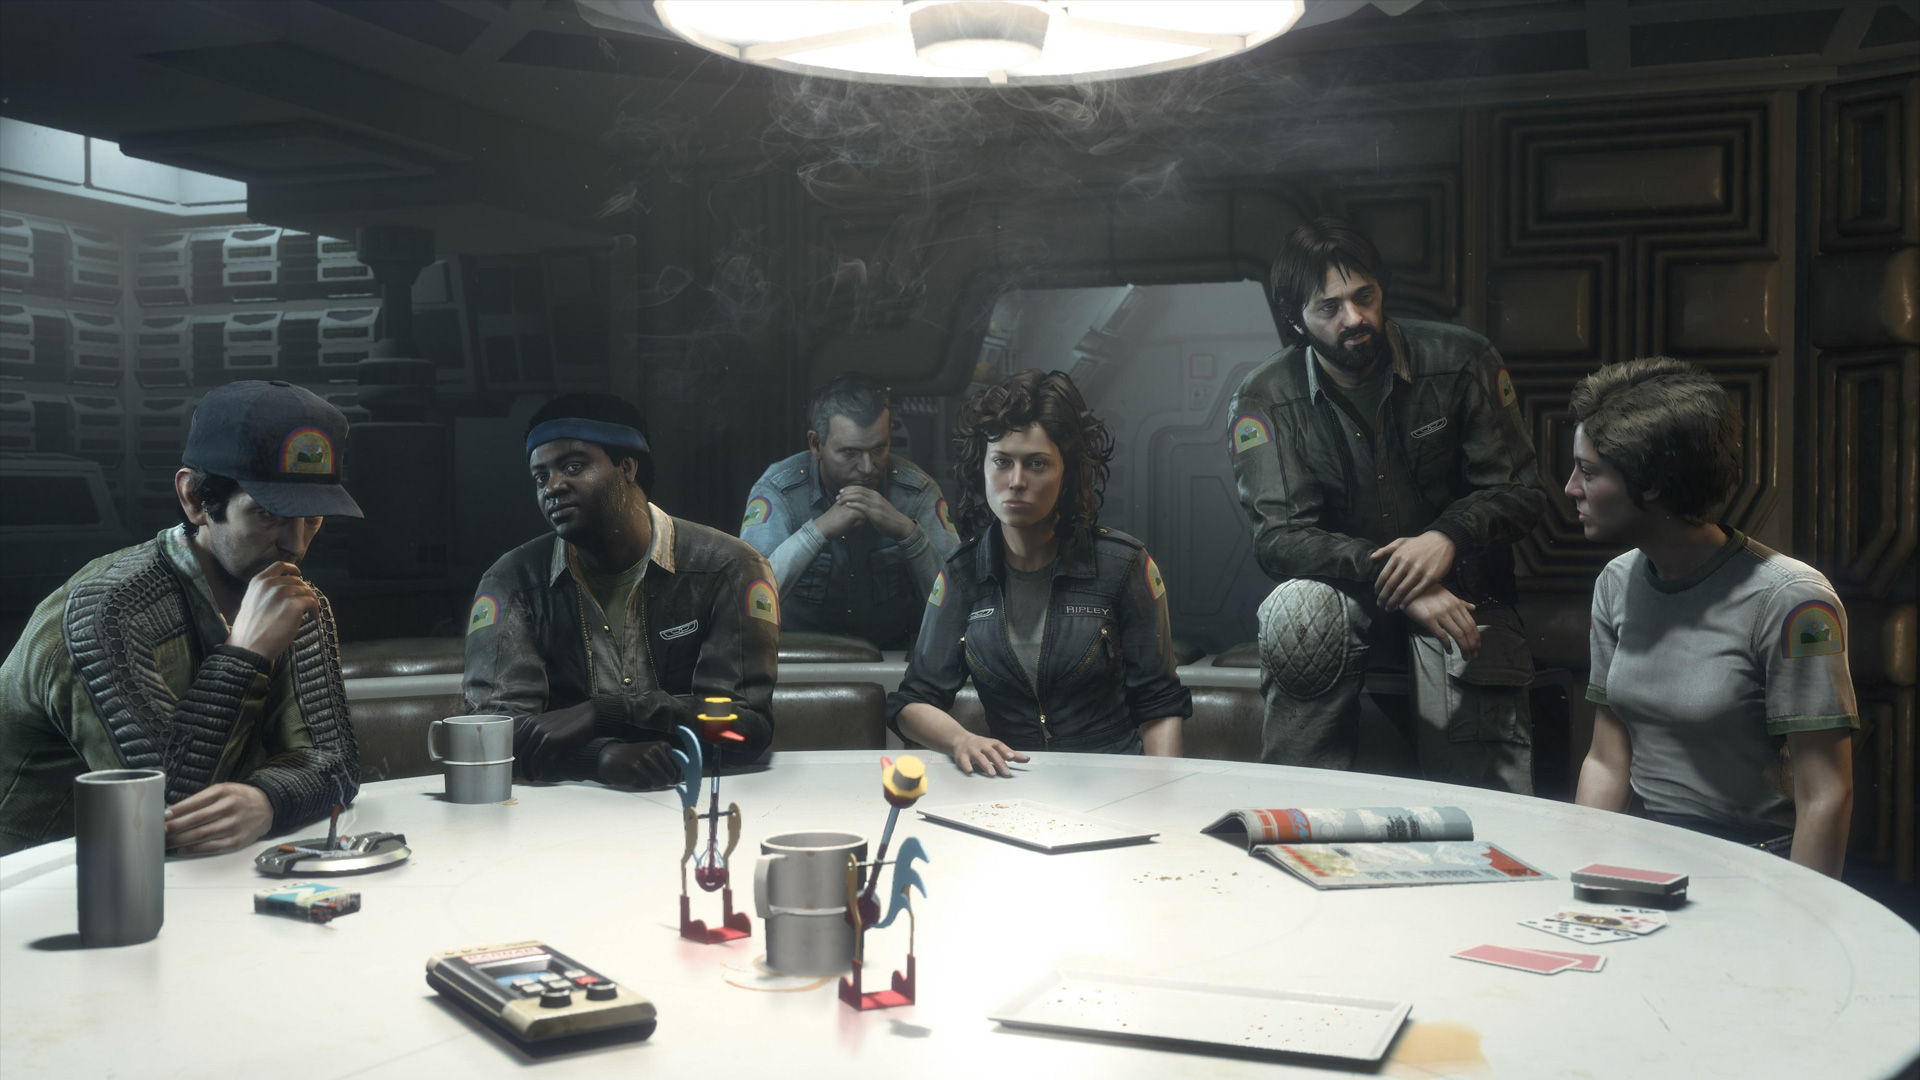 Alien Isolation Crew Expendable - HD Wallpaper 